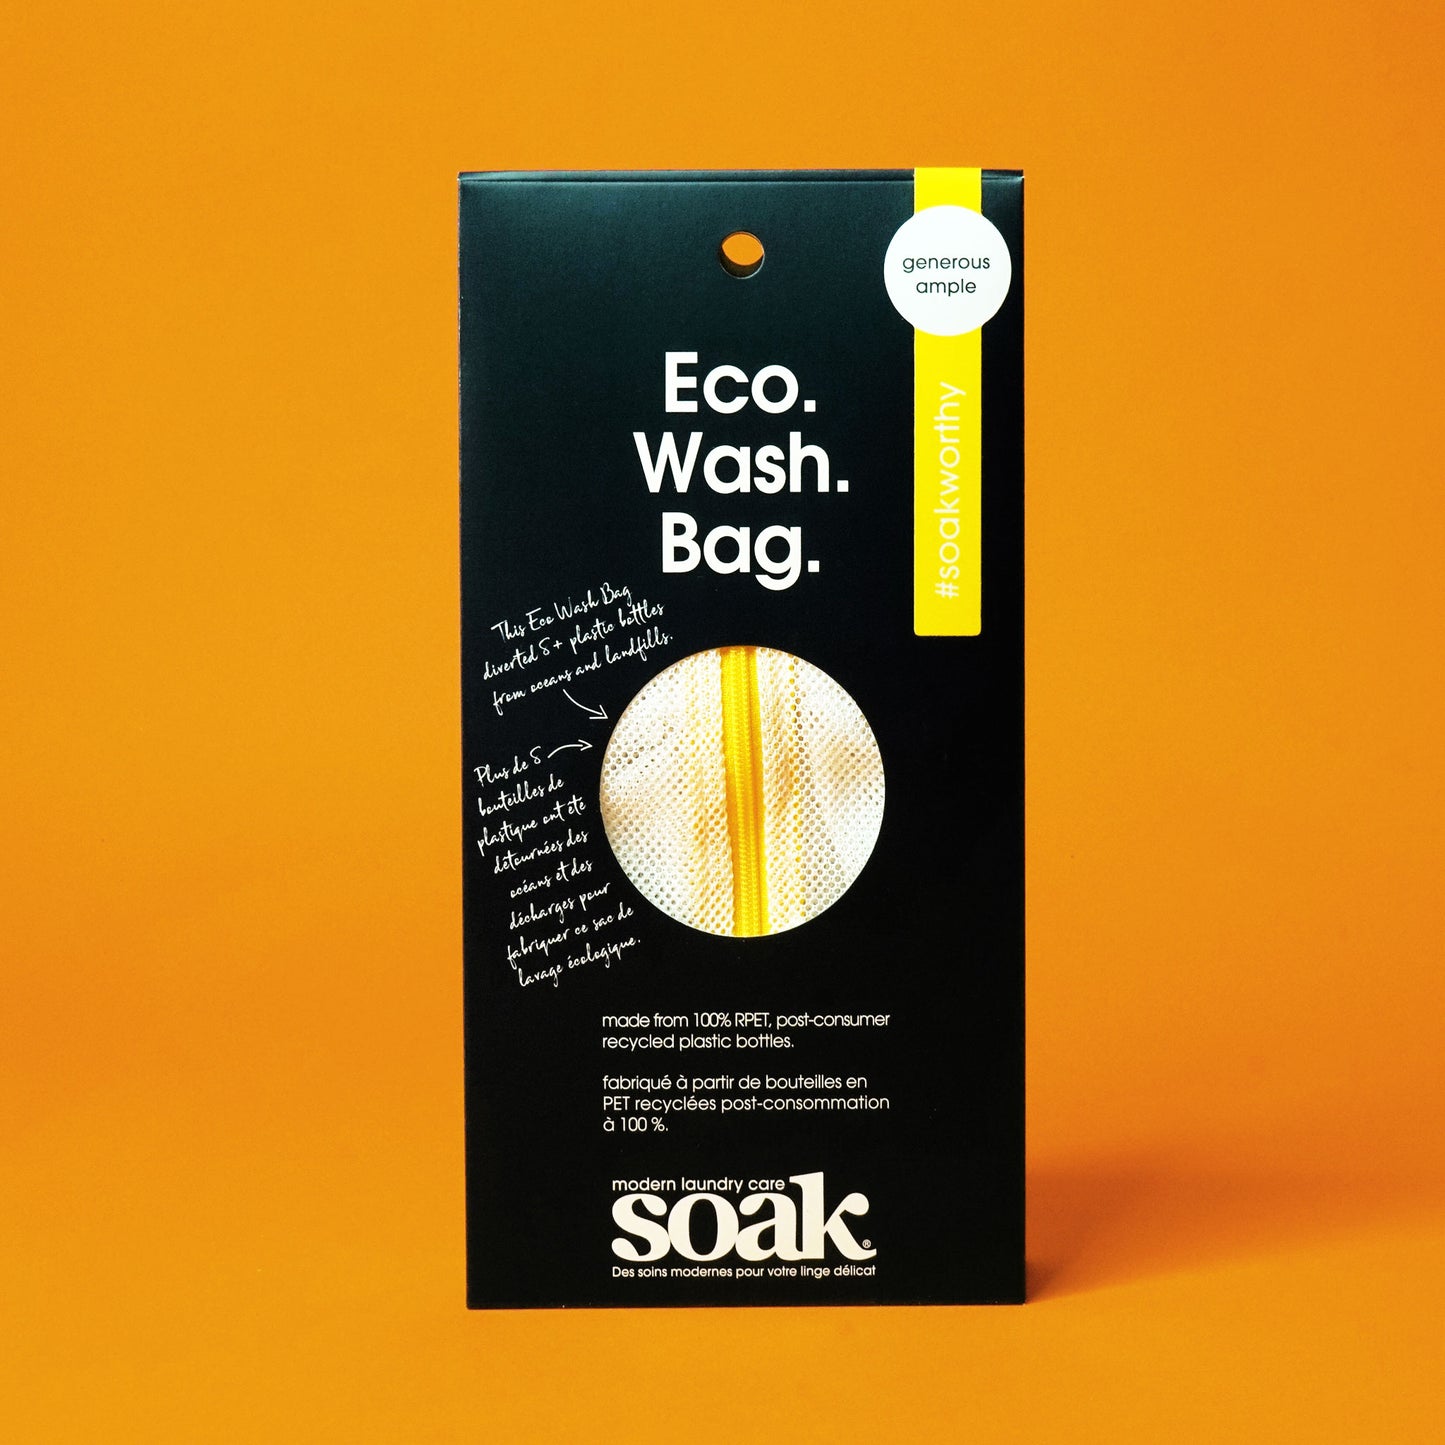 A black rectangular package with a circle cutout showing a mesh material with yellow zipper. The box reads "Eco. Wash. Bag."